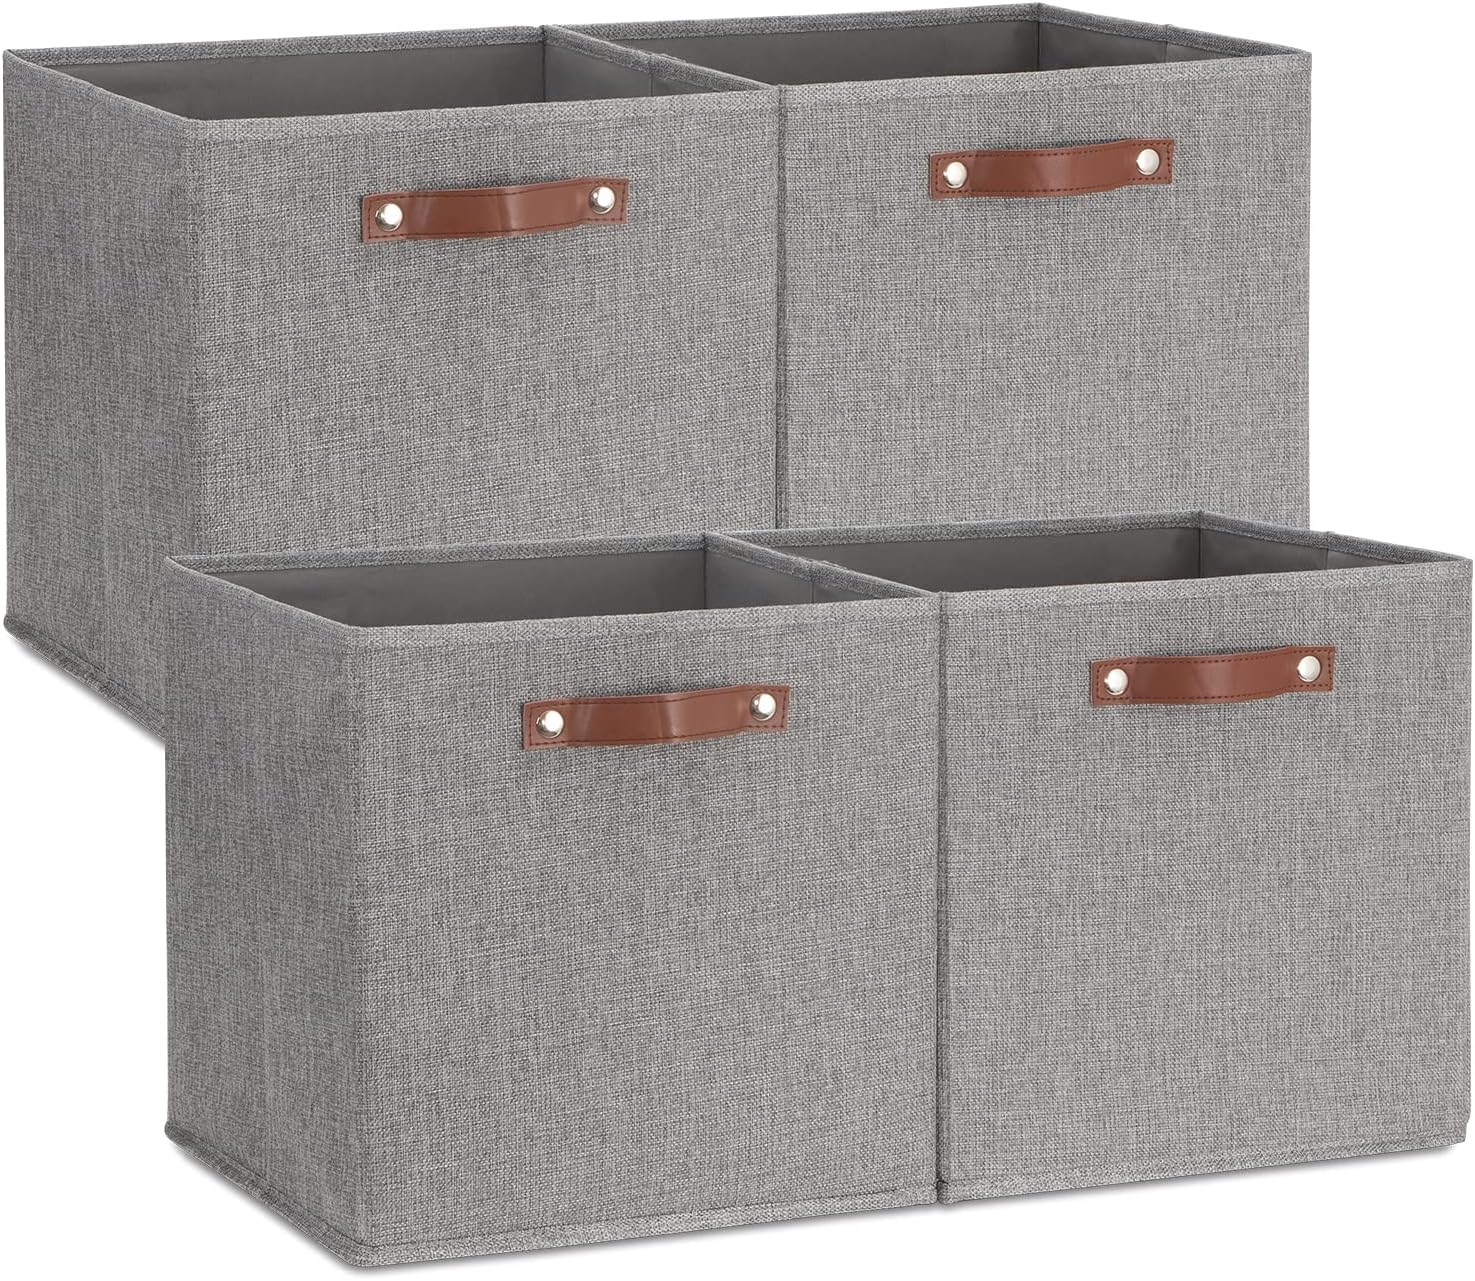 Temary Storage Cubes 13 x 13 Storage Boxes with Handles Fabric Cube Storage Bins for Home Office, Storage Baskets for organizing Toy Clothes, Collapsible Closet Organizers (Gray)